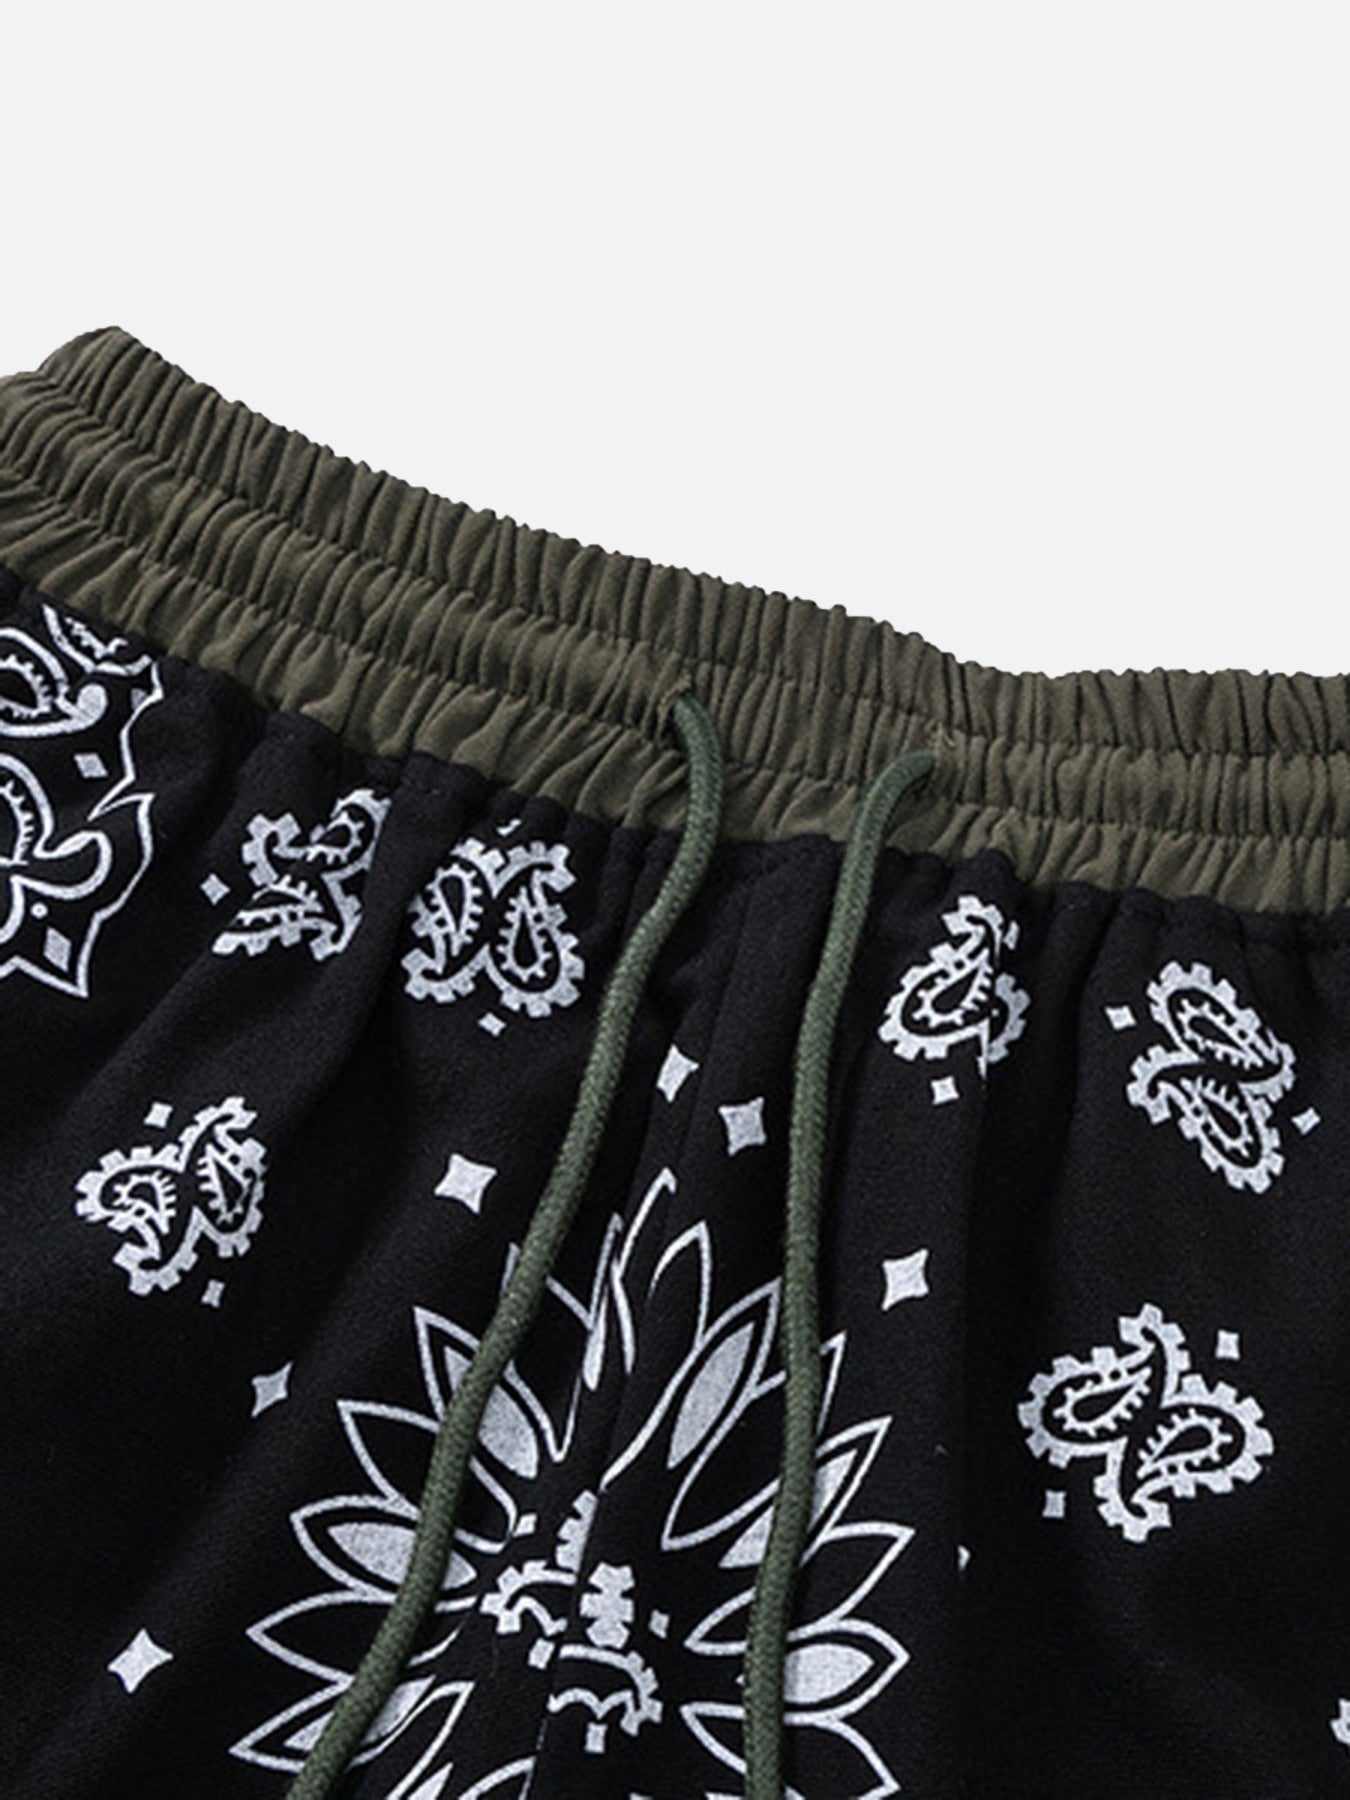 The Supermade High Street Cashew Flower Casual Shorts